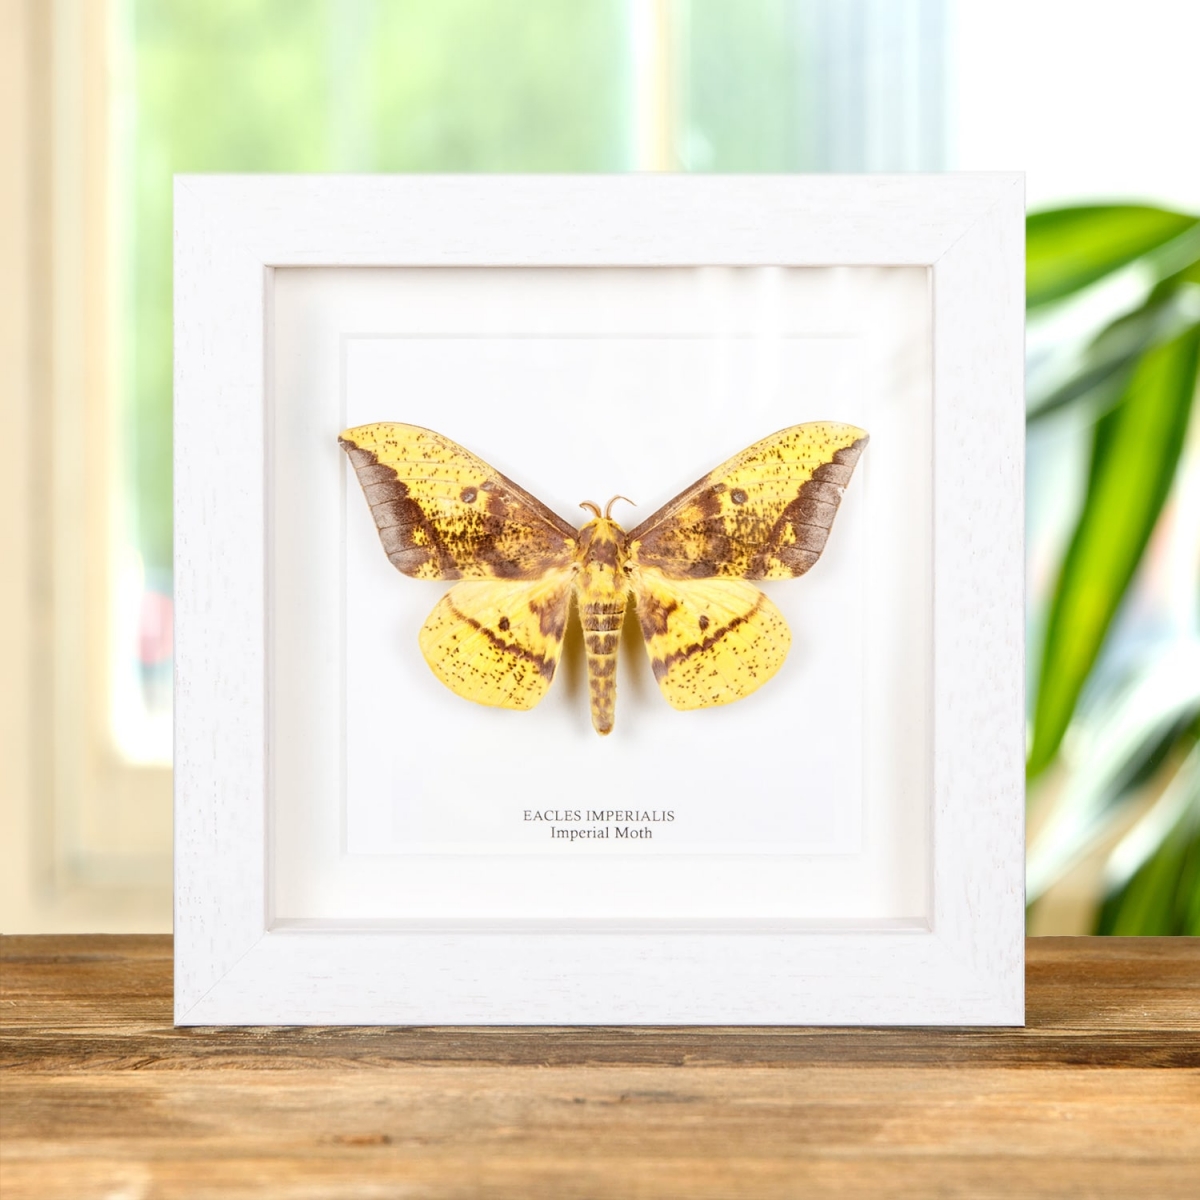 Imperial Moth in Box Frame (Eacles imperialis)